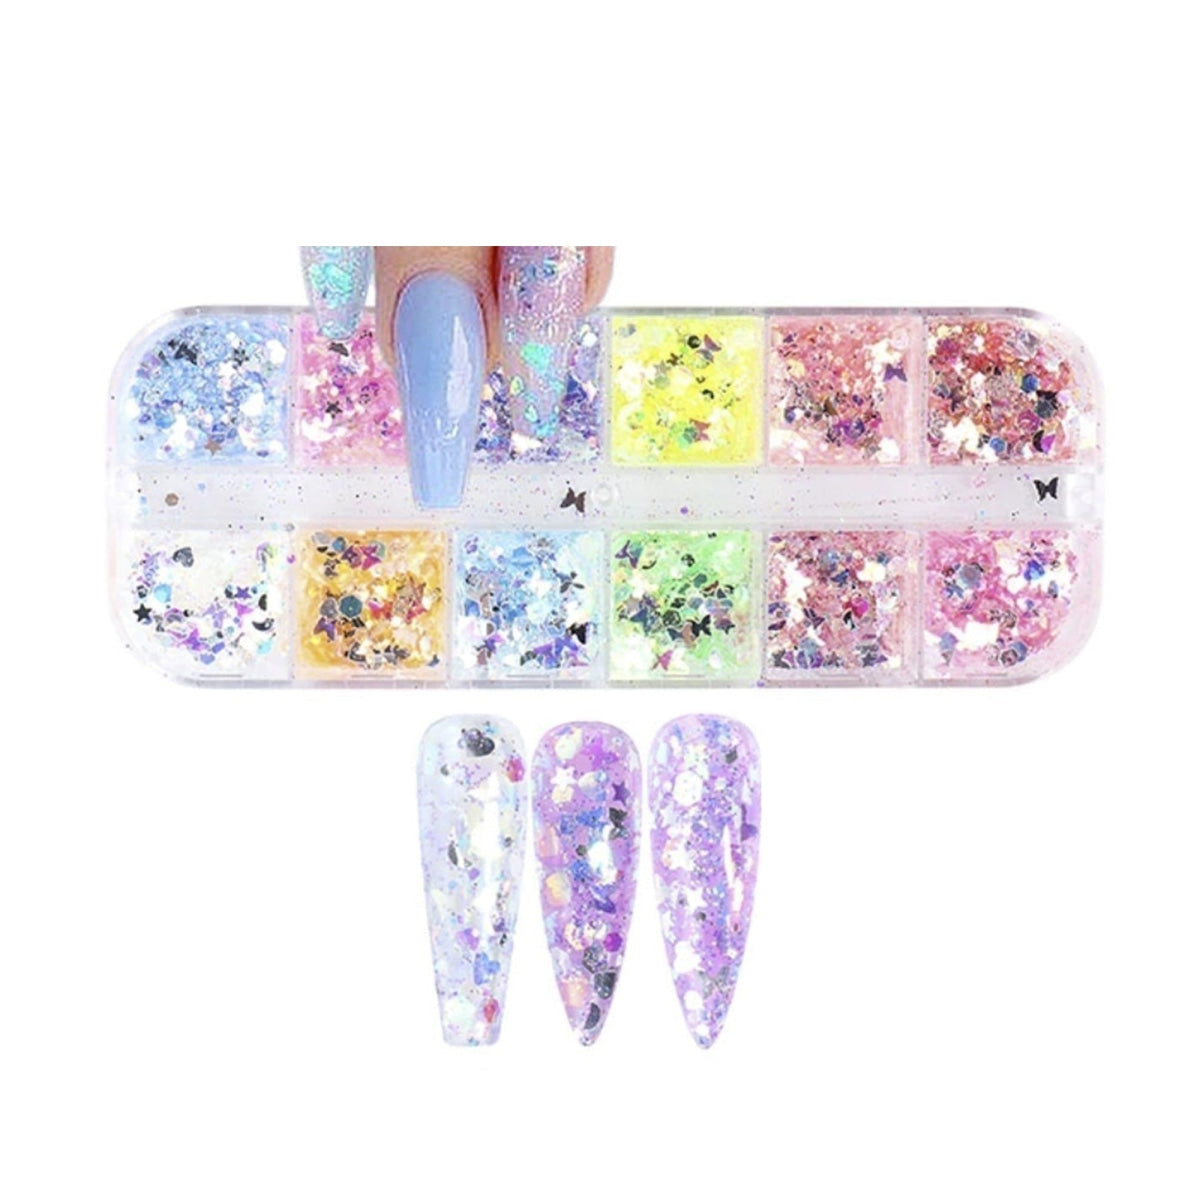 Holographic Irregular Nail Paillette Slices Art Sequins Flakes - Tube Cuts